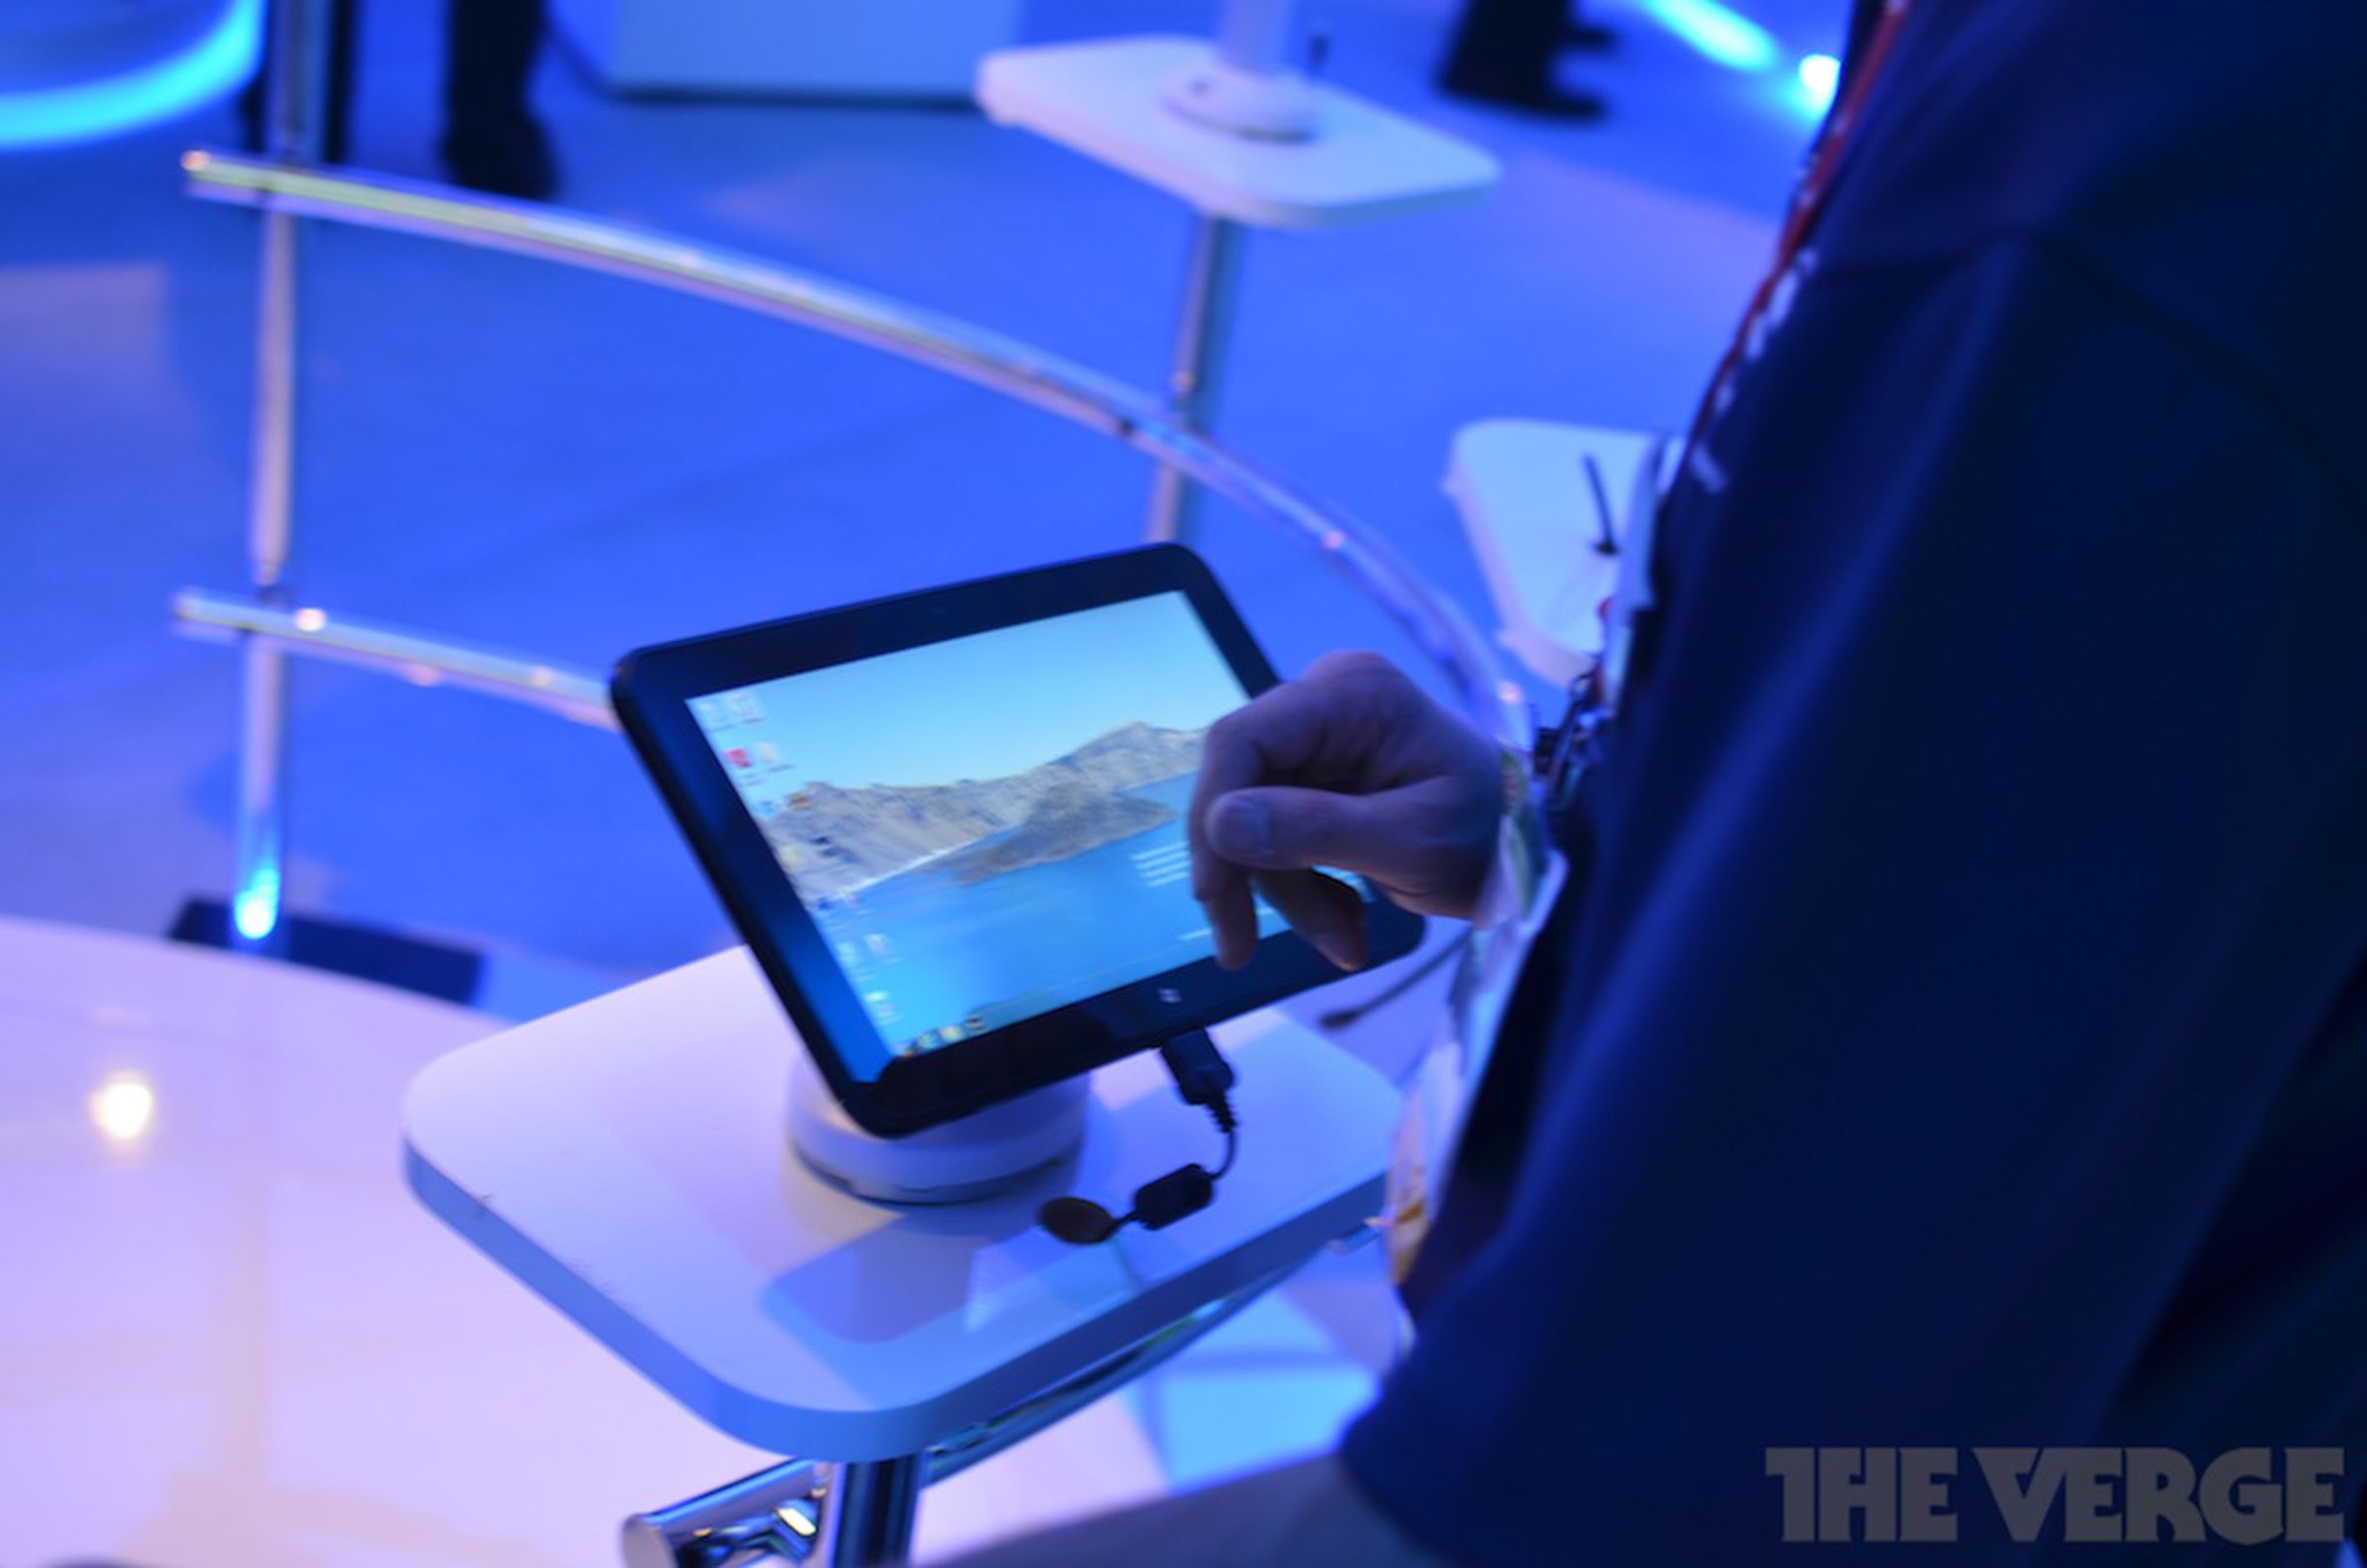 Intel Clover Trail Tablet hands on pictures